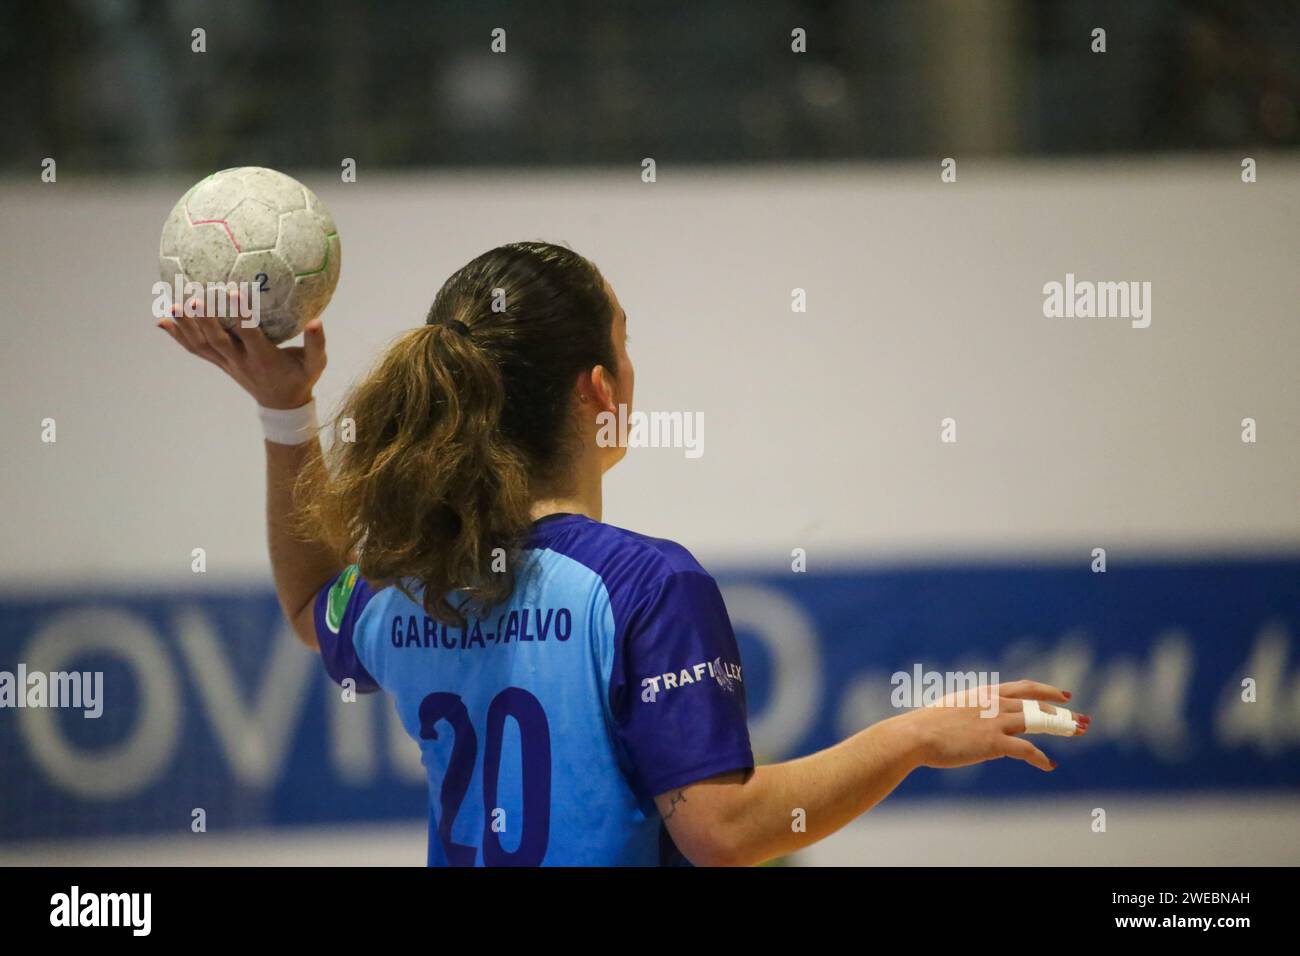 Oviedo, Spain. 23rd Jan, 2024. The player of Lobas Global Atac Oviedo, Carmen García-Calvo (20) with the ball during the Second phase of the XLV Copa de S.M. The Queen enters Lobas Global Atac Oviedo and Atticgo BM. Elche, on January 23, 2024, at the Florida Arena Municipal Sports Center, in Oviedo, Spain. (Photo by Alberto Brevers/Pacific Press/Sipa USA) Credit: Sipa USA/Alamy Live News Stock Photo